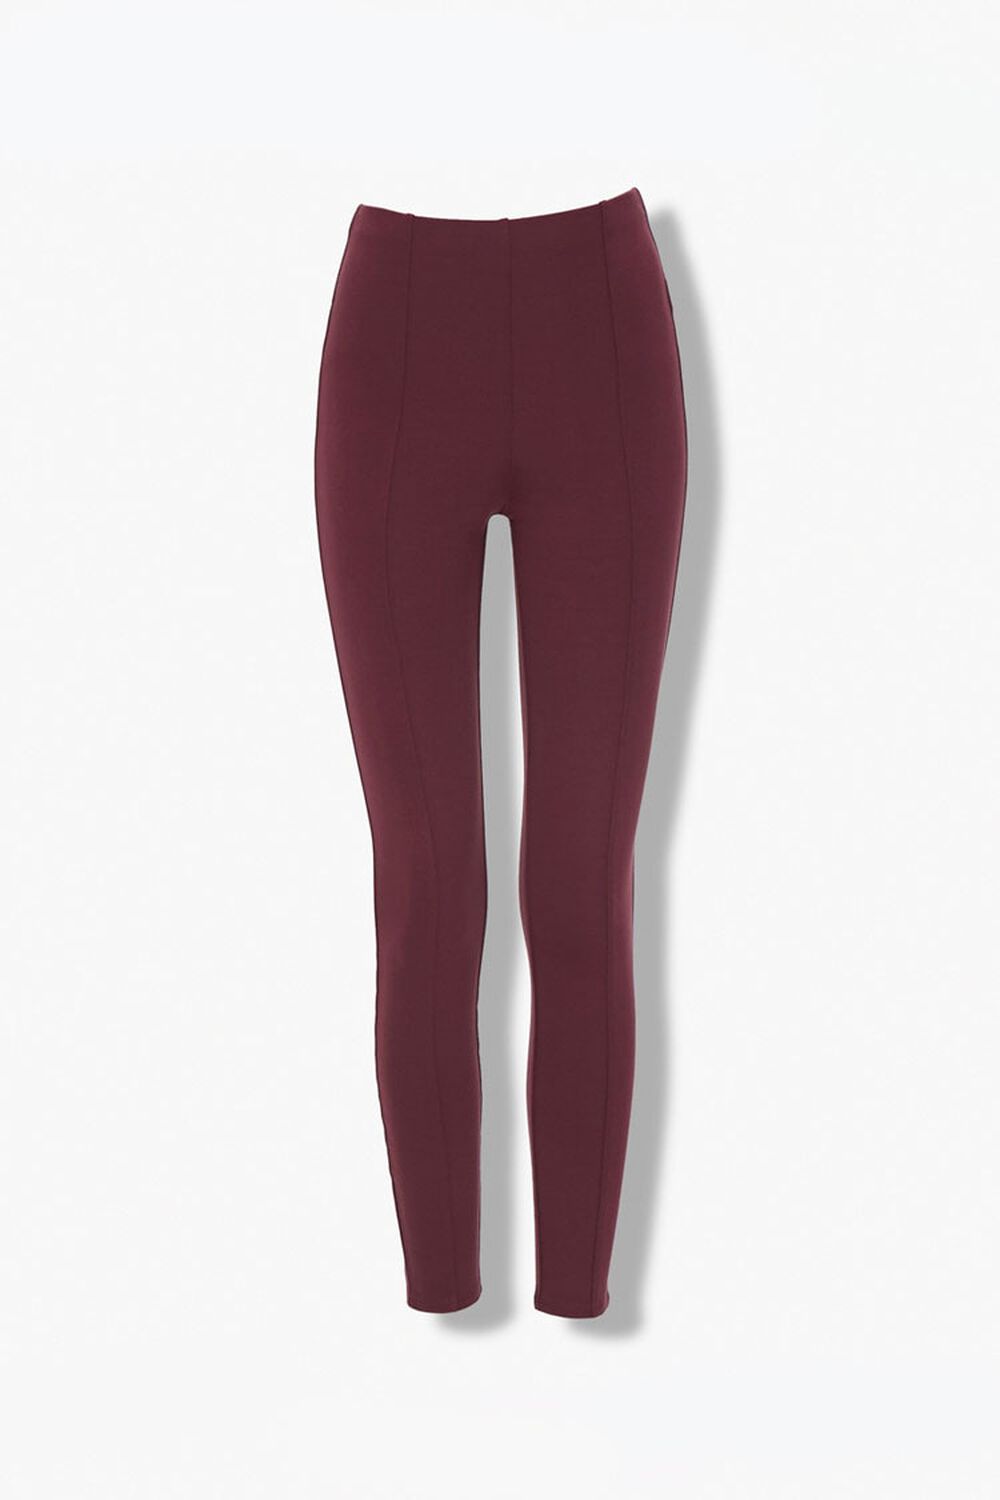 BURGUNDY Classic Thick Knit Leggings, image 1